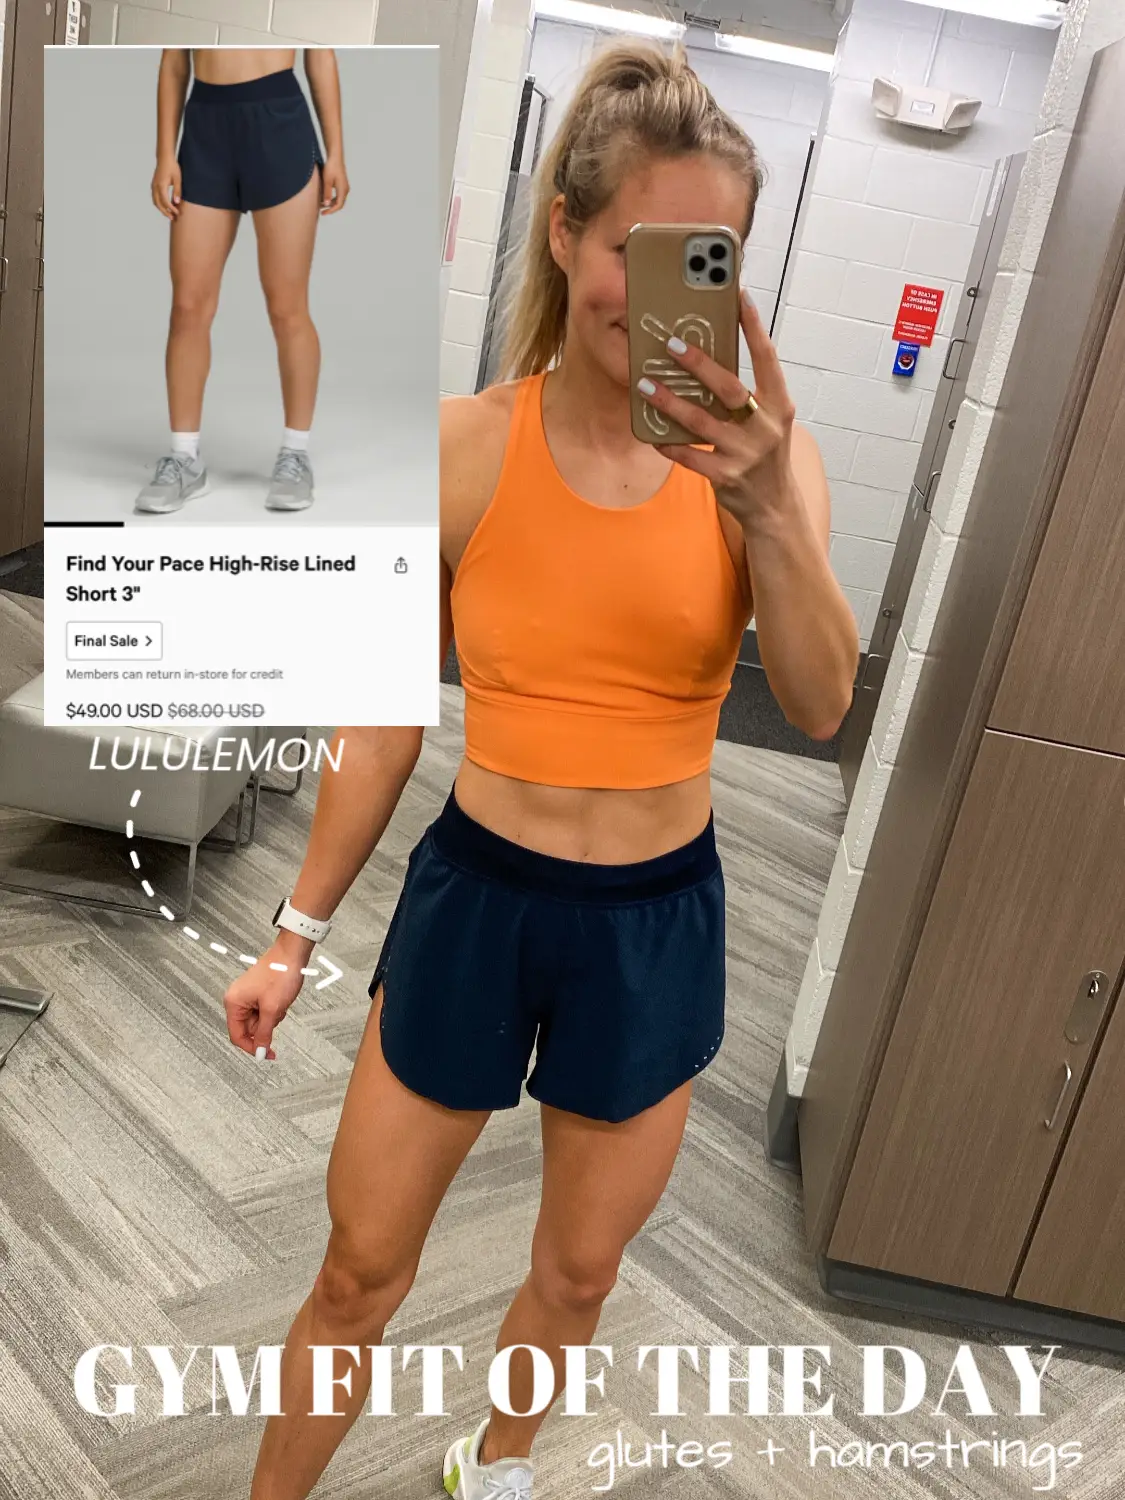 Find Your Pace shorts + Flow Y bra = best duo ever : r/lululemon